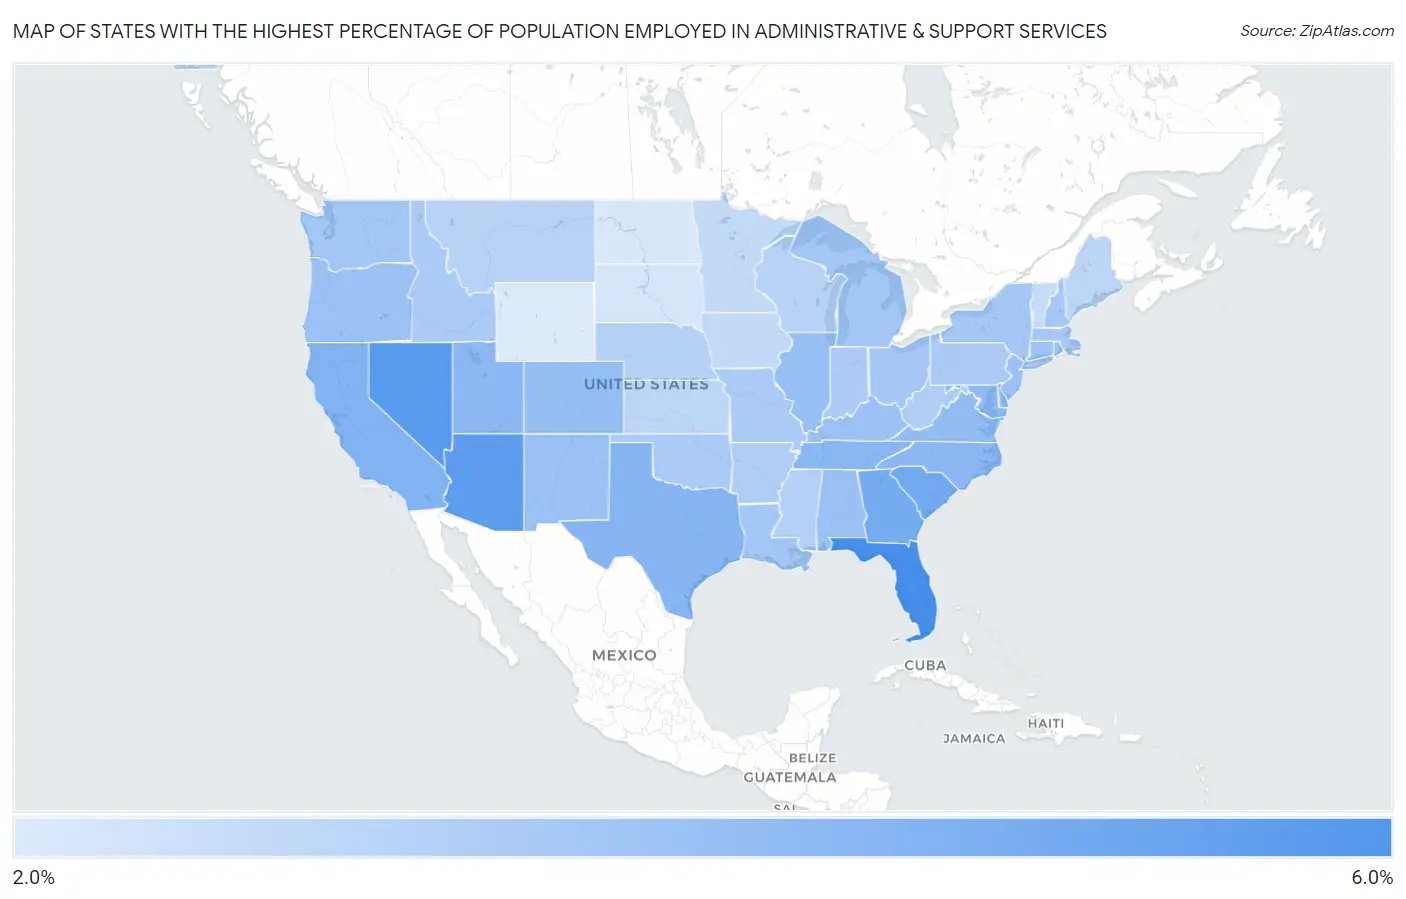 States with the Highest Percentage of Population Employed in Administrative & Support Services in the United States Map